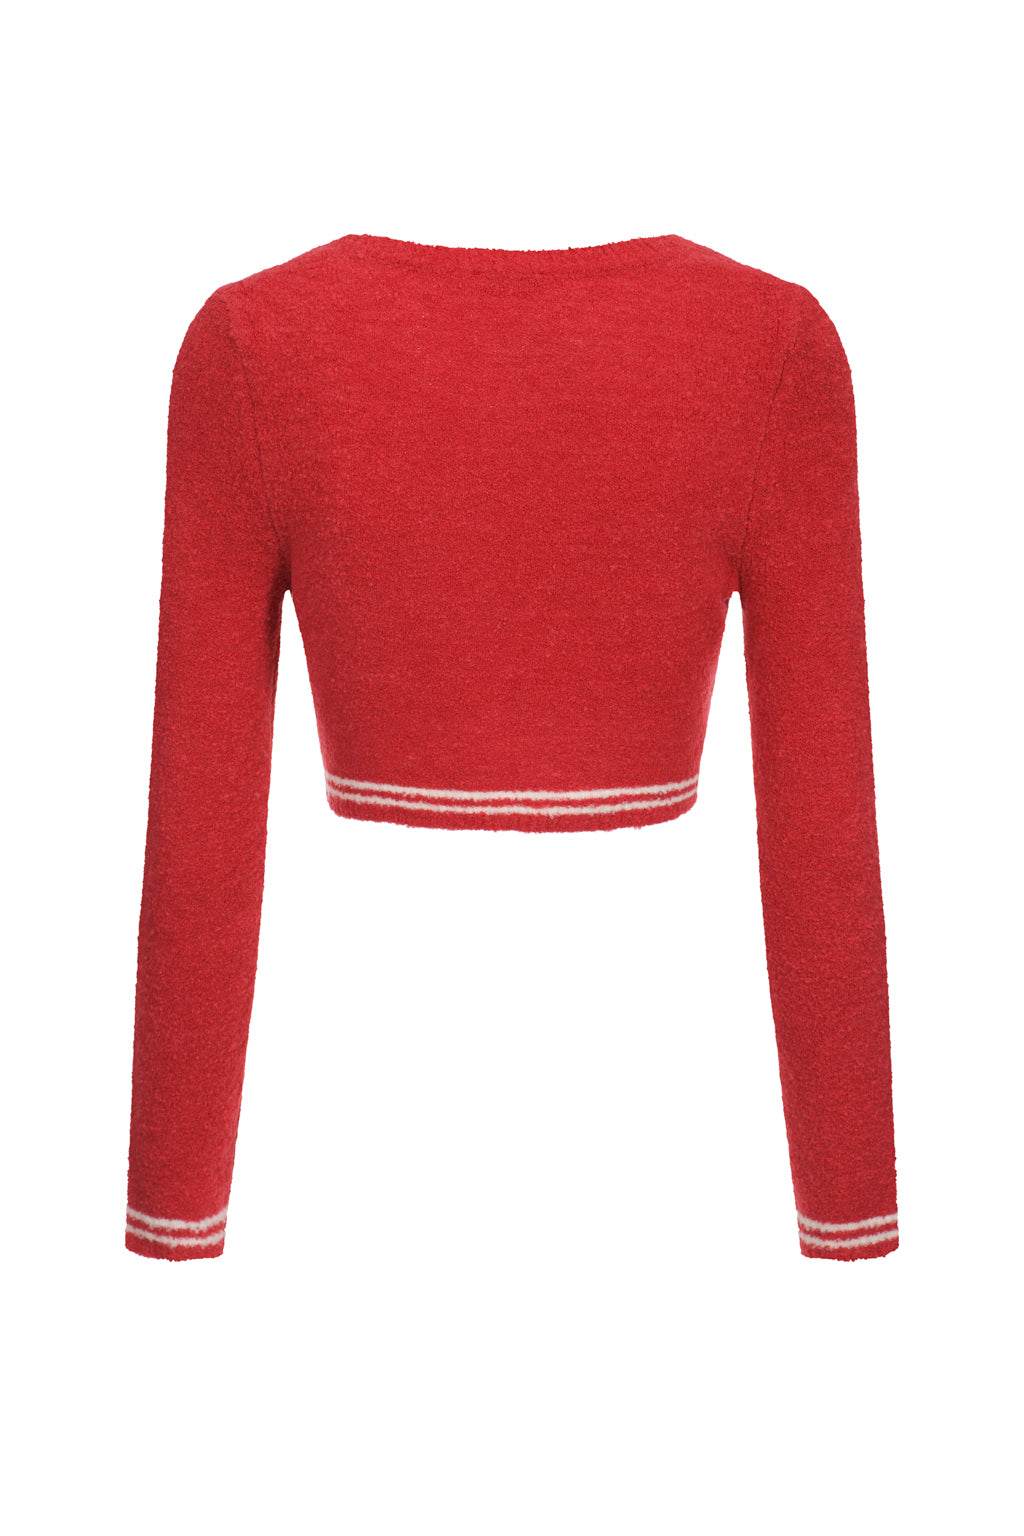 Short Cropped Loop Knit Top - Cherry Red